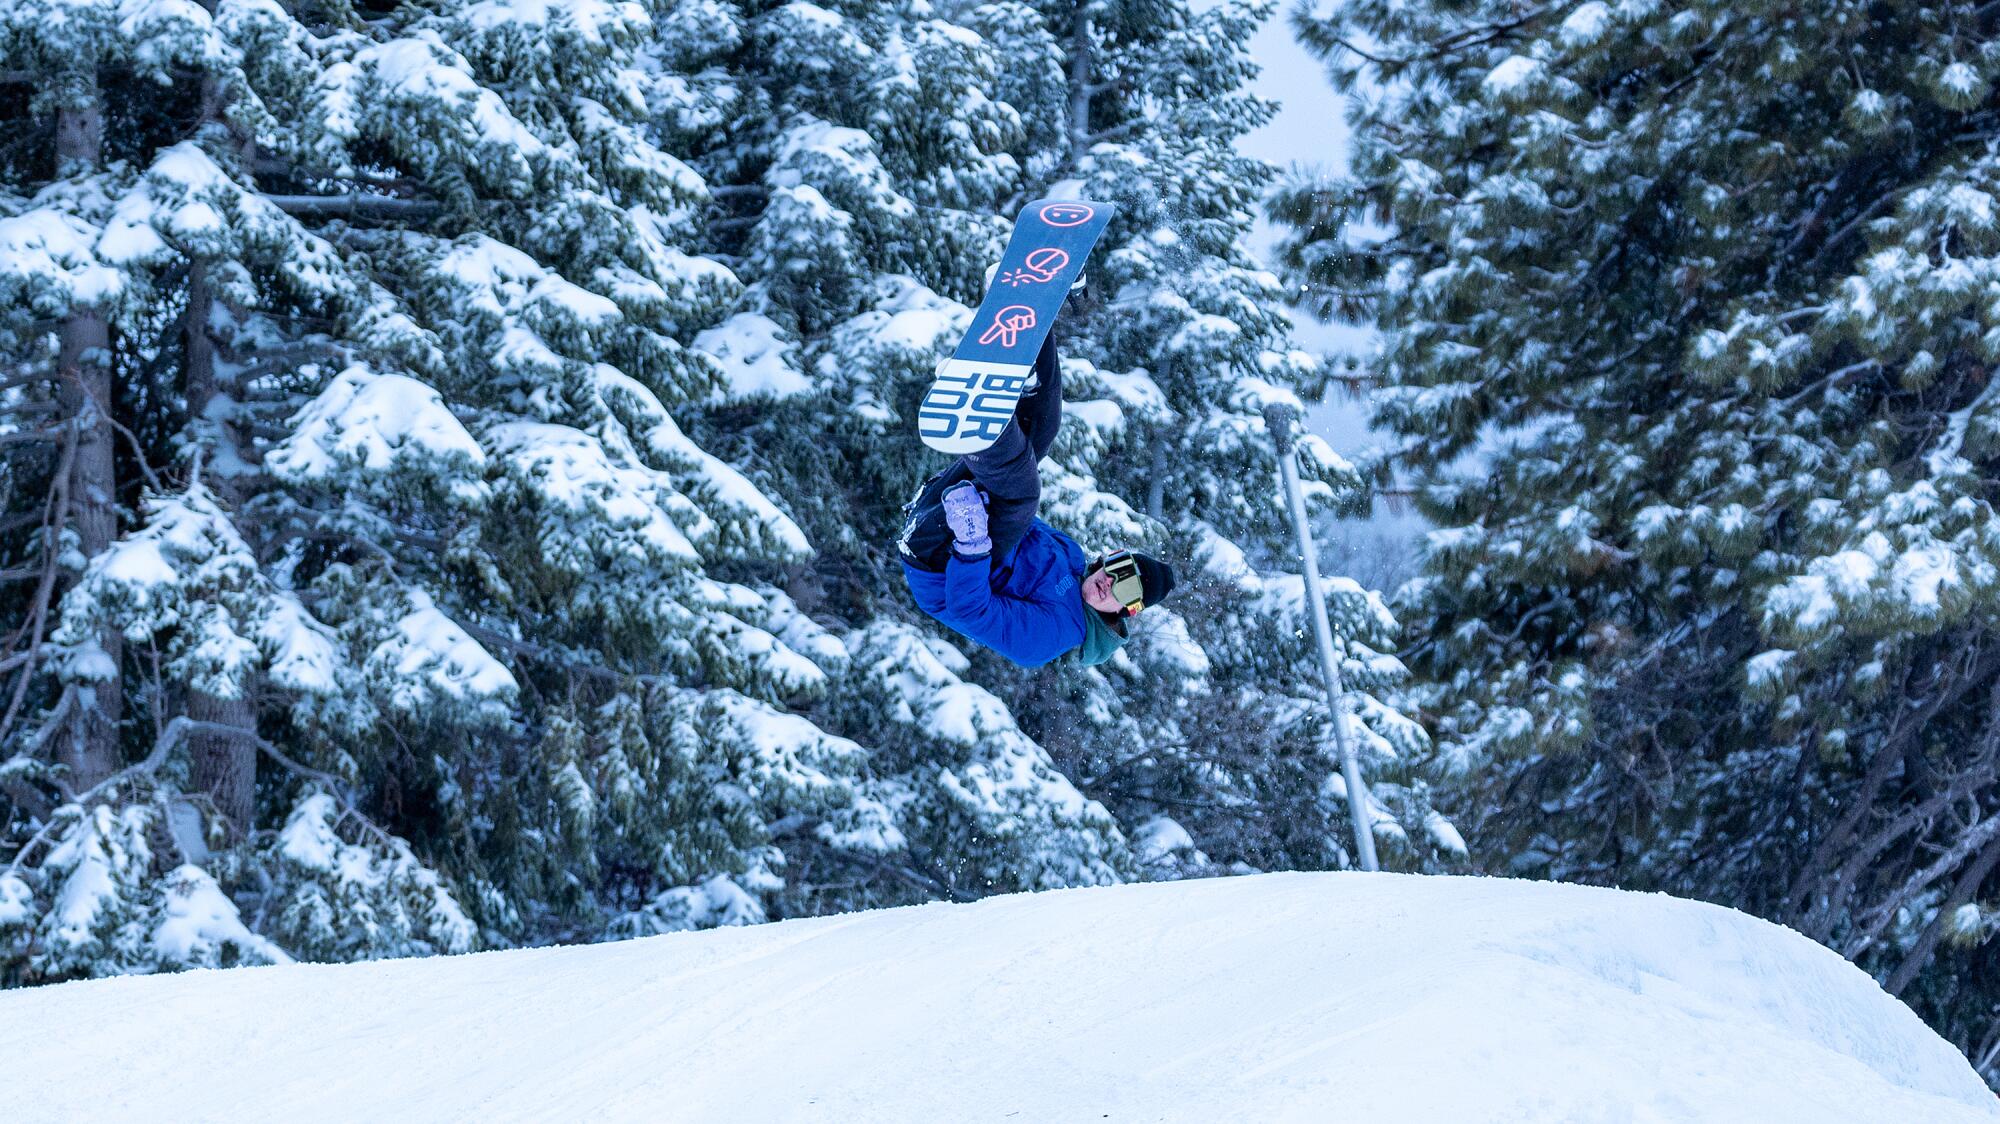 A snowboarder takes flight off a jump.